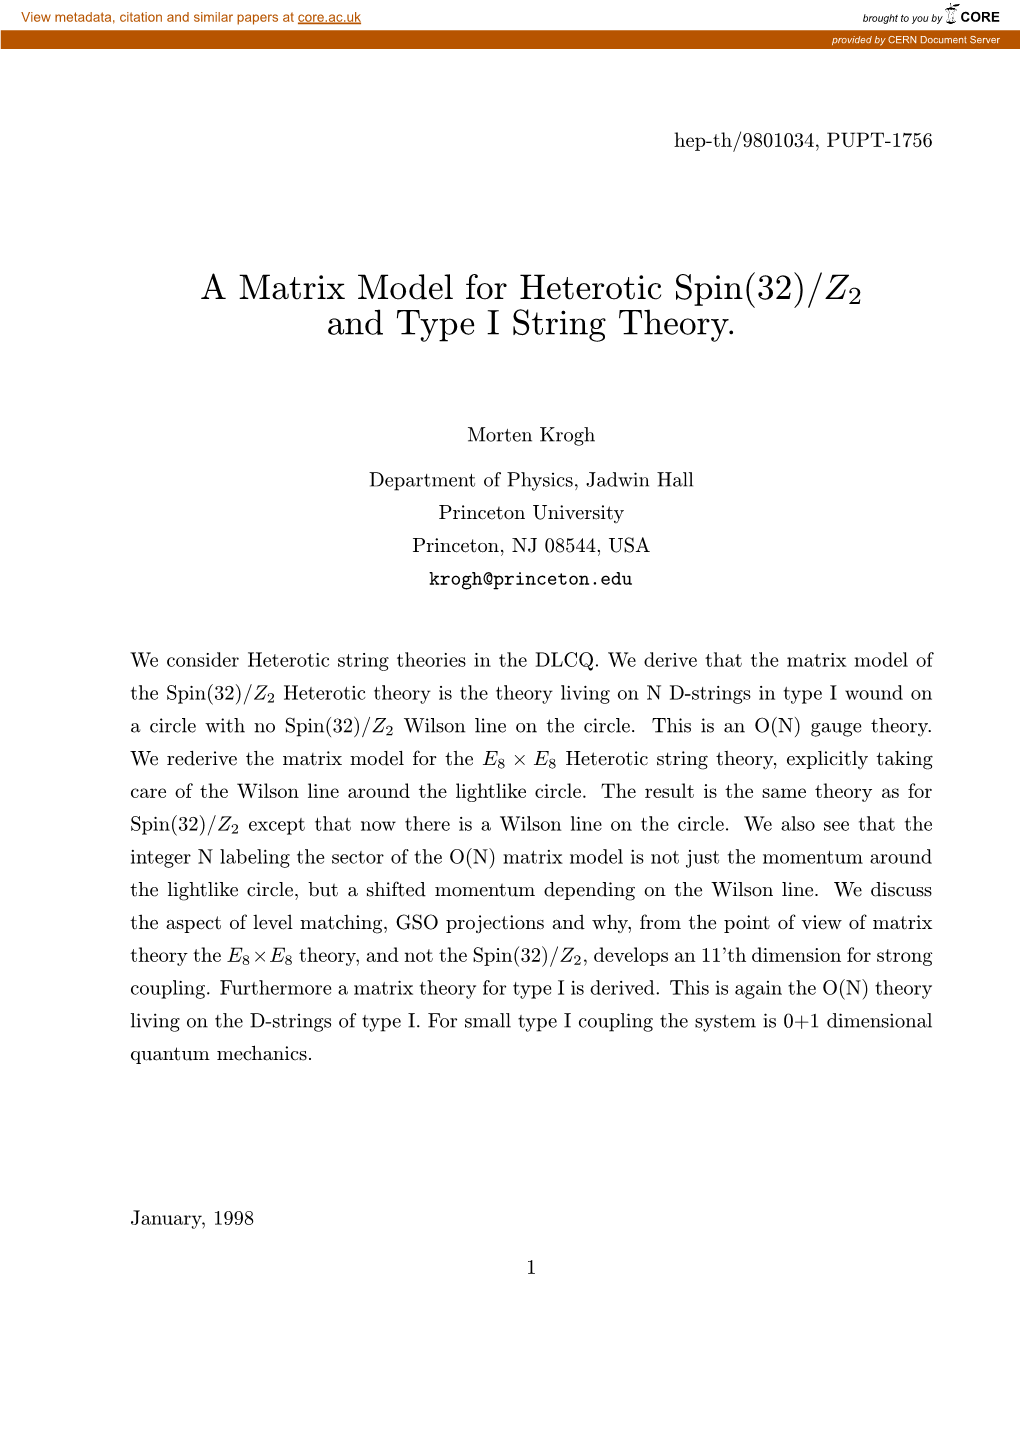 A Matrix Model for Heterotic Spin(32)/Z2 and Type I String Theory